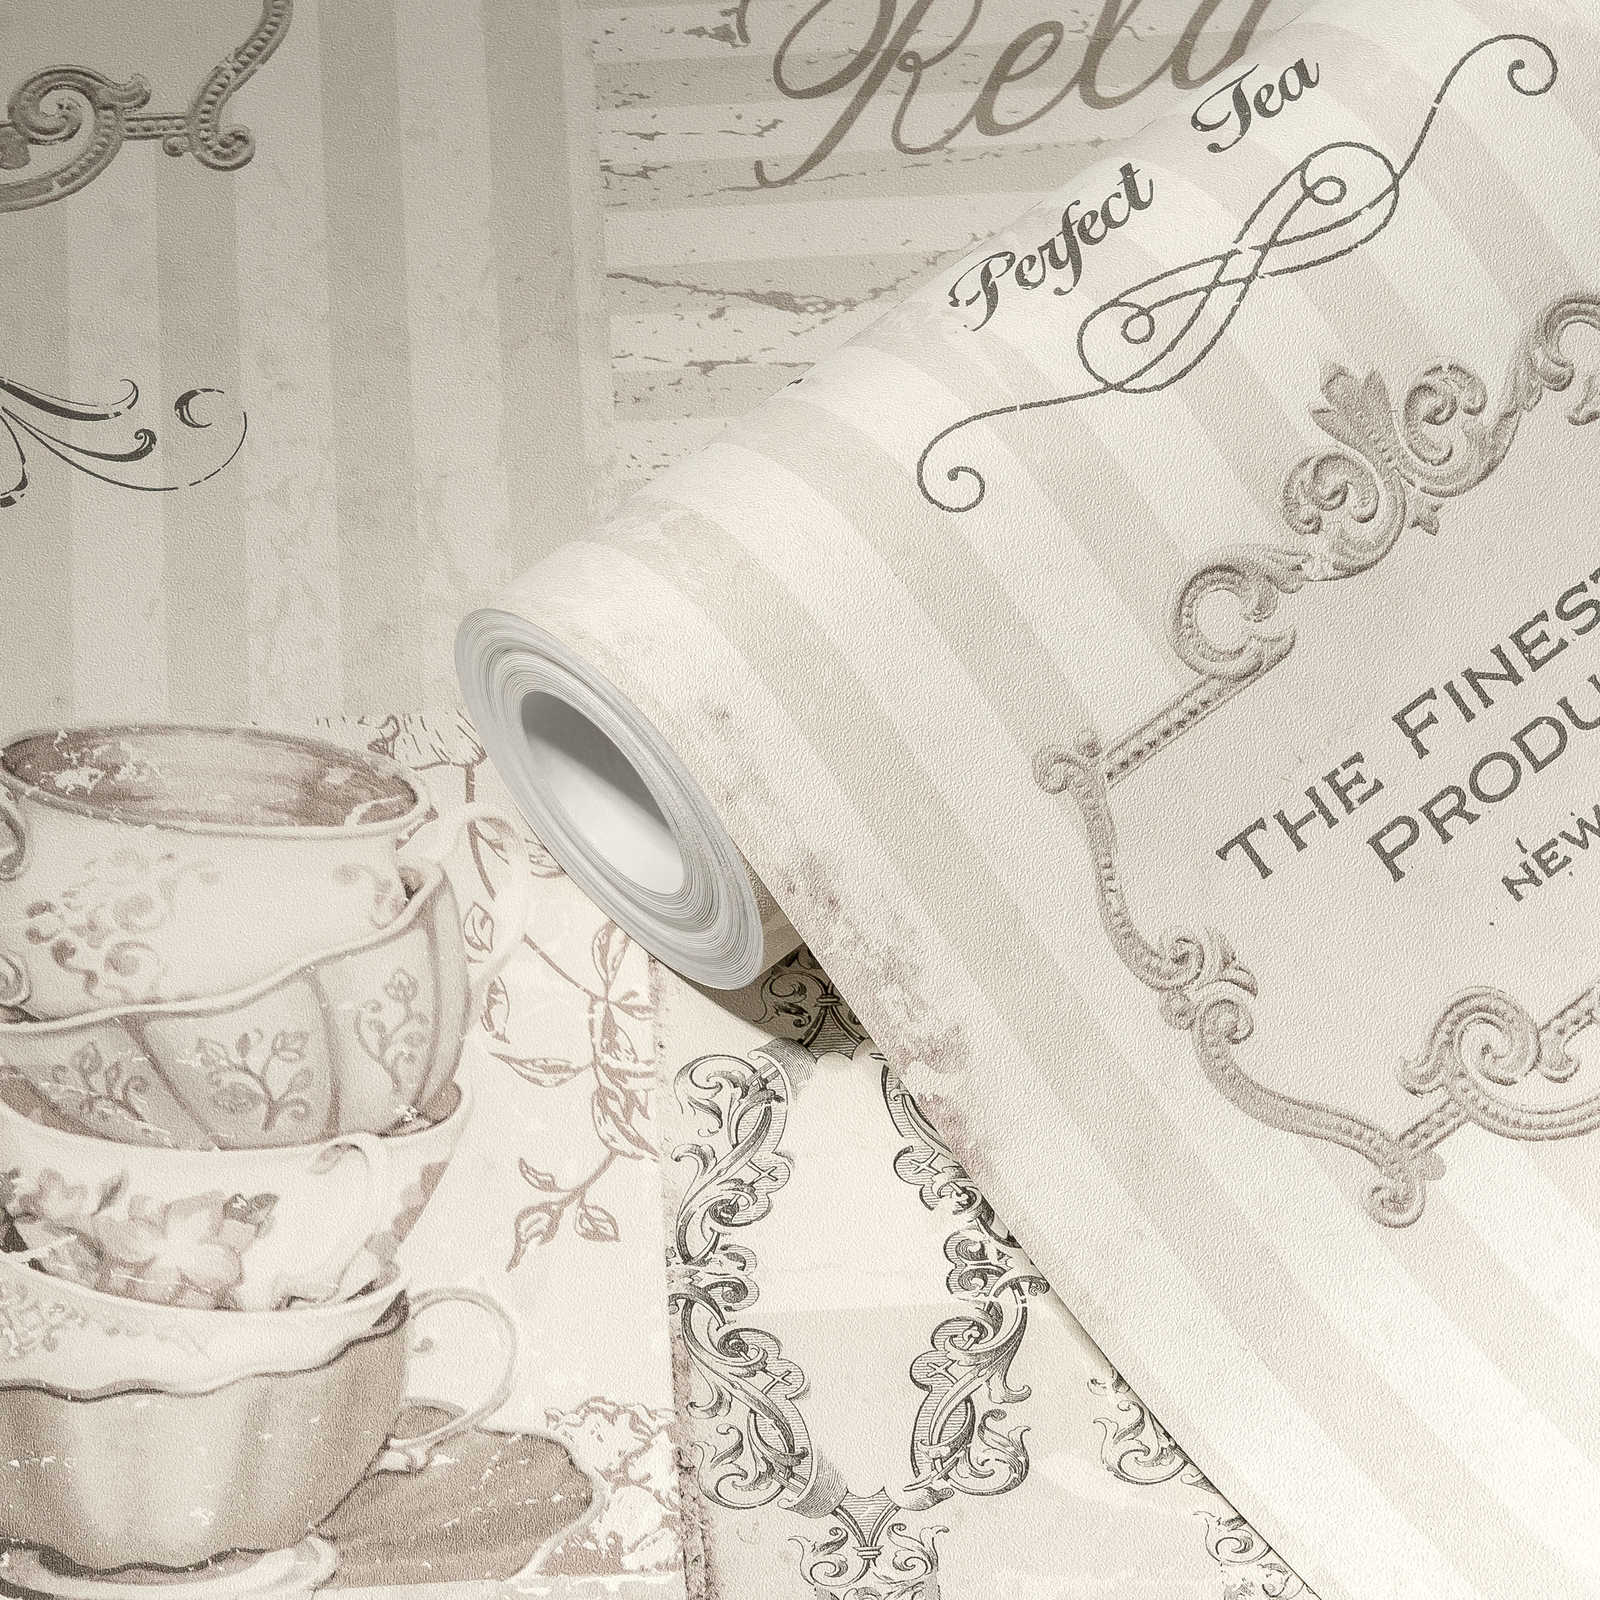             Pattern wallpaper Tea Time collage in country style - grey
        